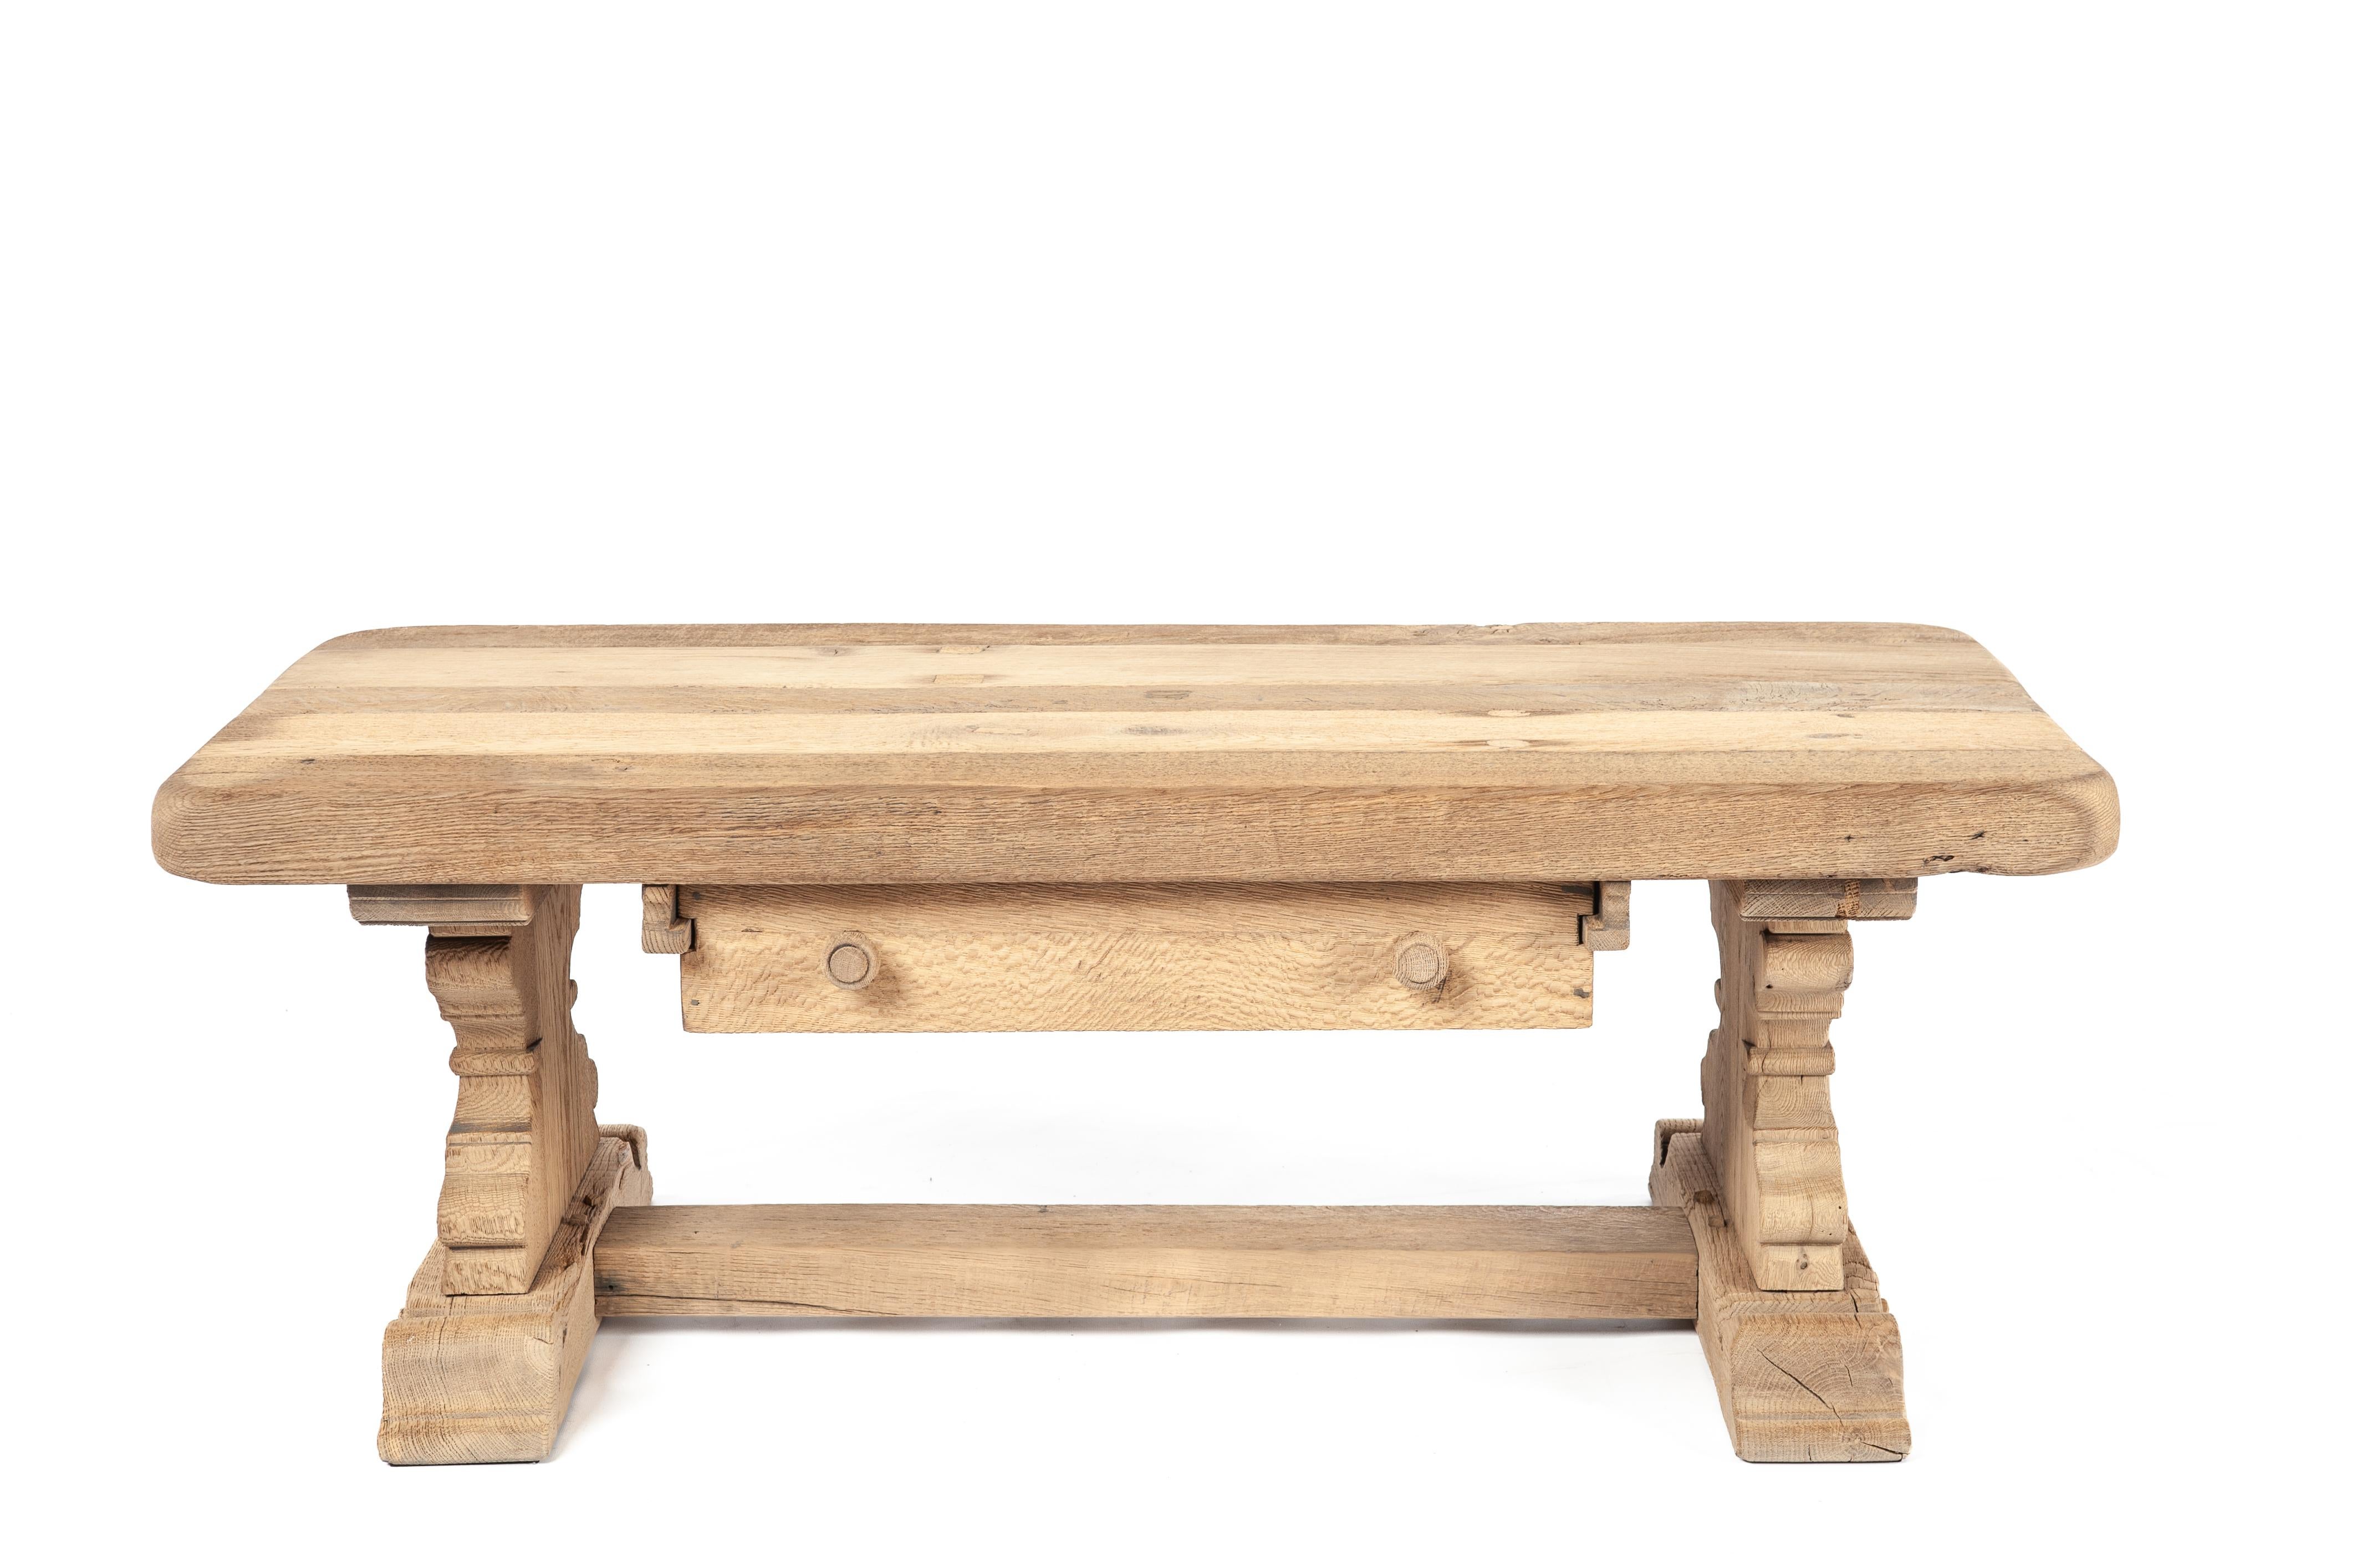 Dutch Vintage Mid 20h Century Solid Weathered Oak rustic Coffee Table with Drawer For Sale